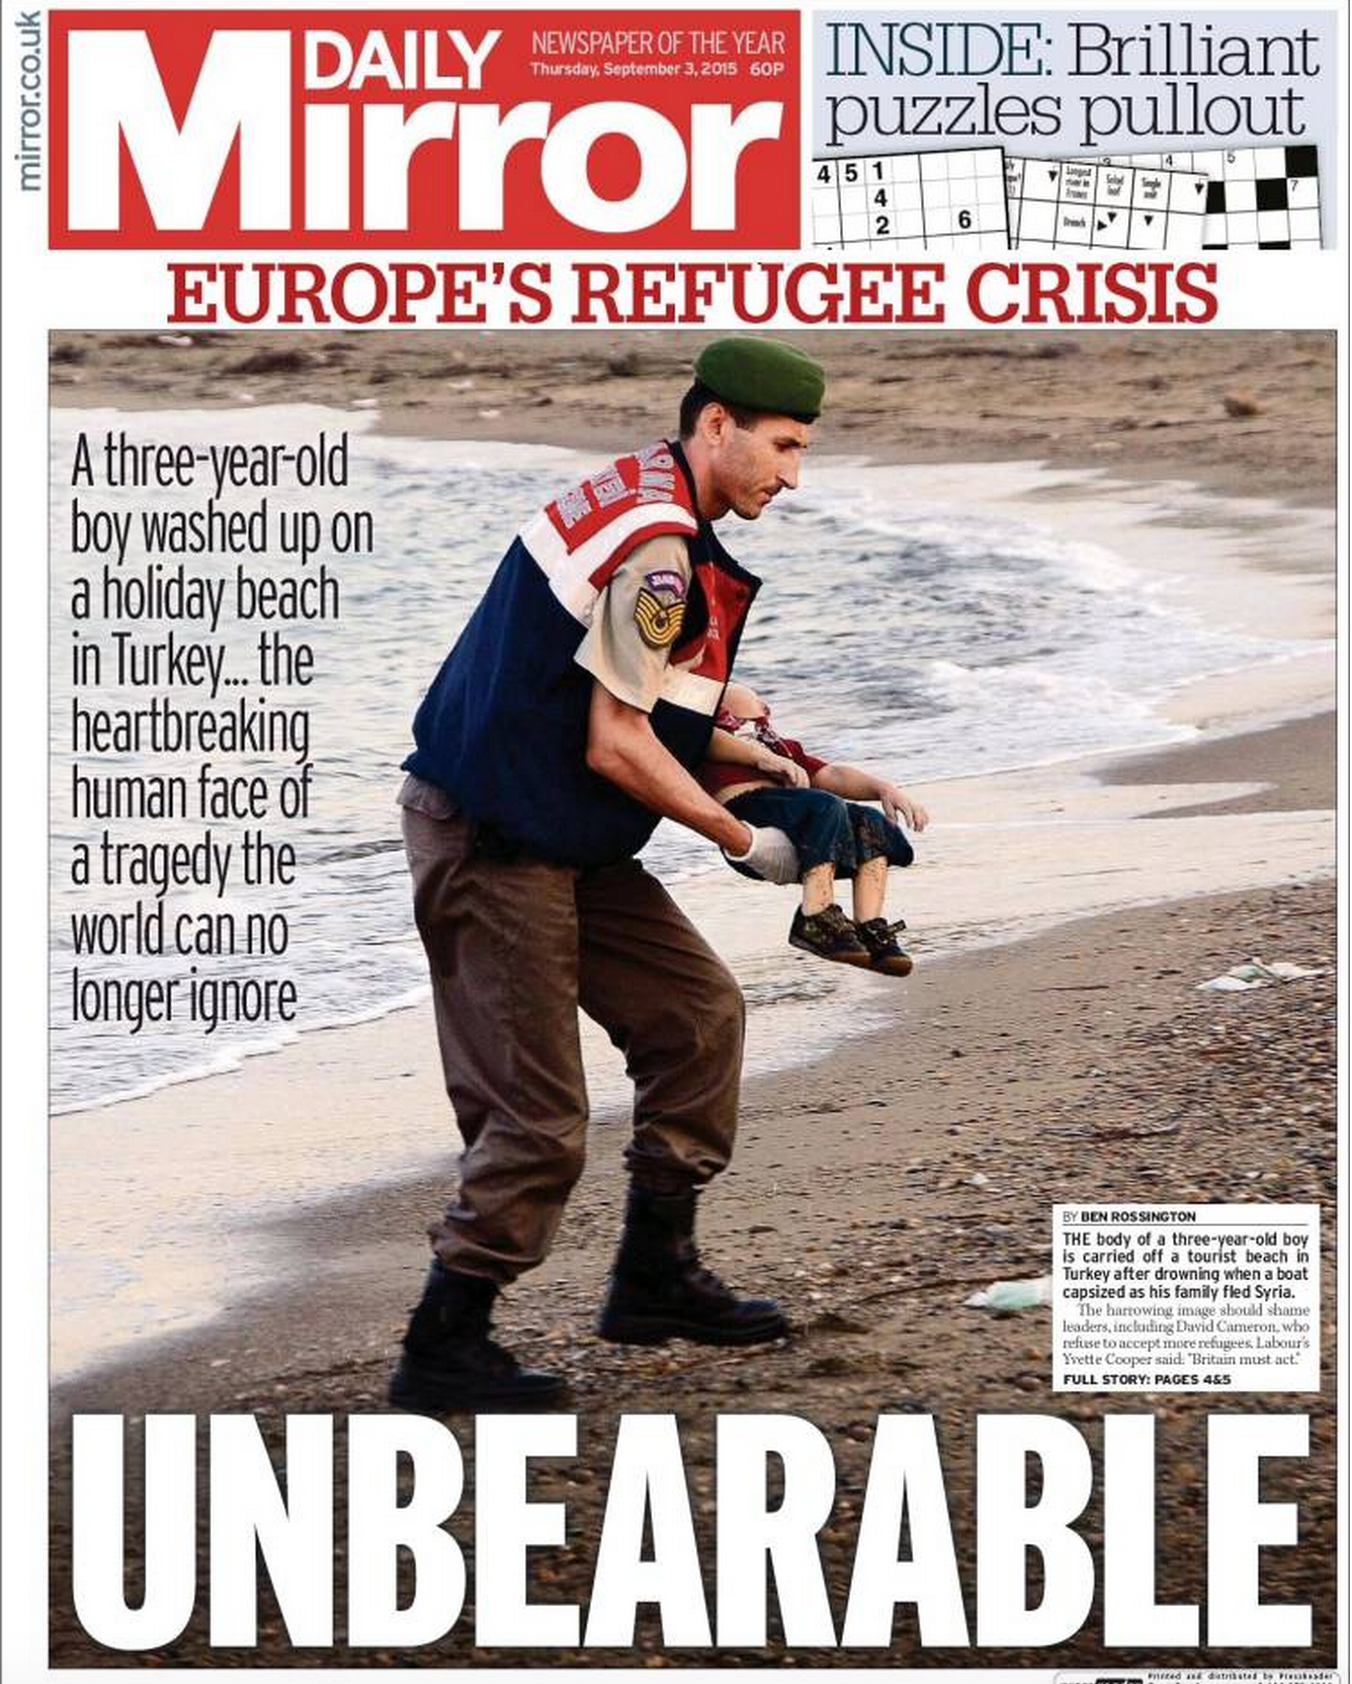 Drowned Migrant Boy Daily Mirror front page